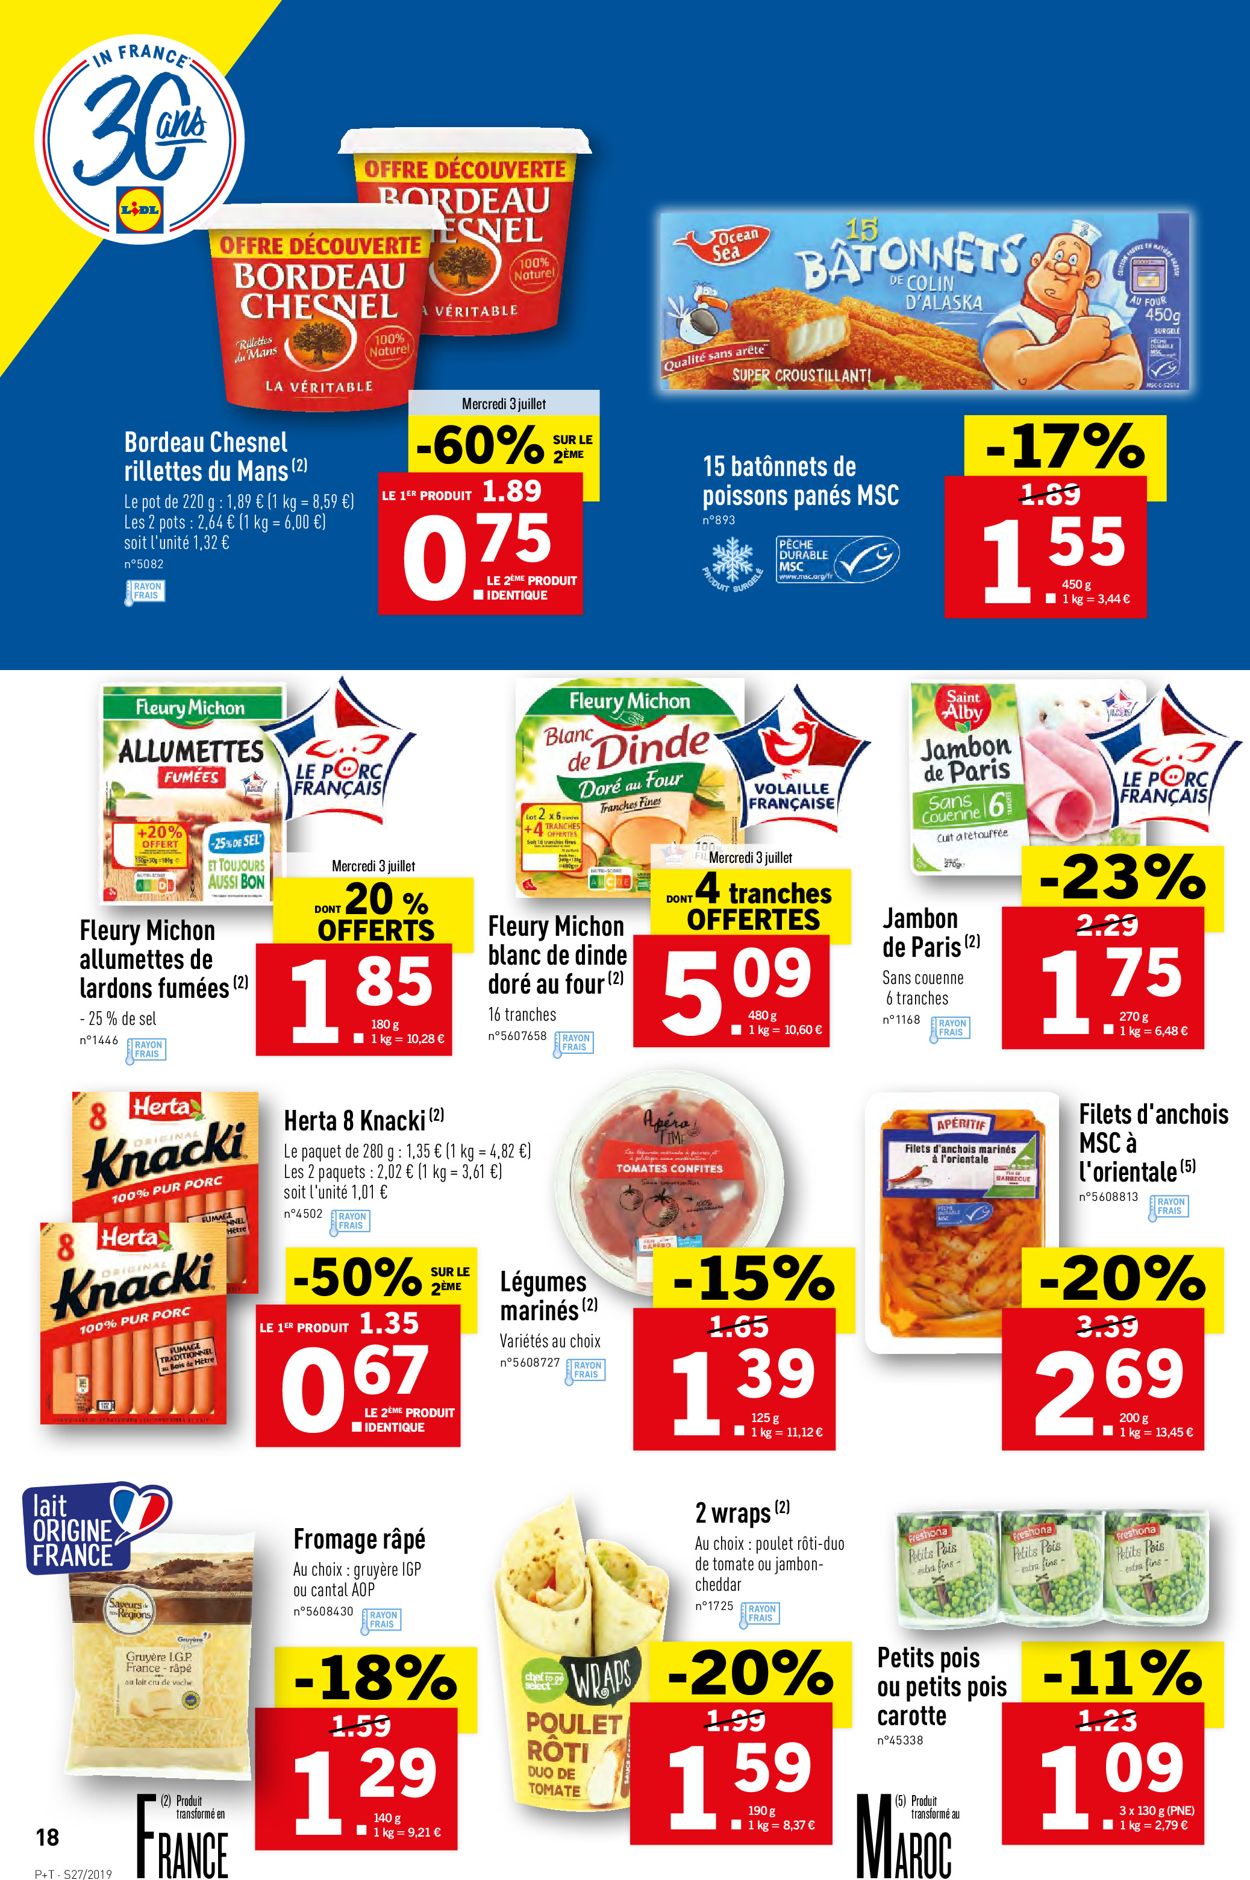 Lidl Catalogue - 03.07-09.07.2019 (Page 18)